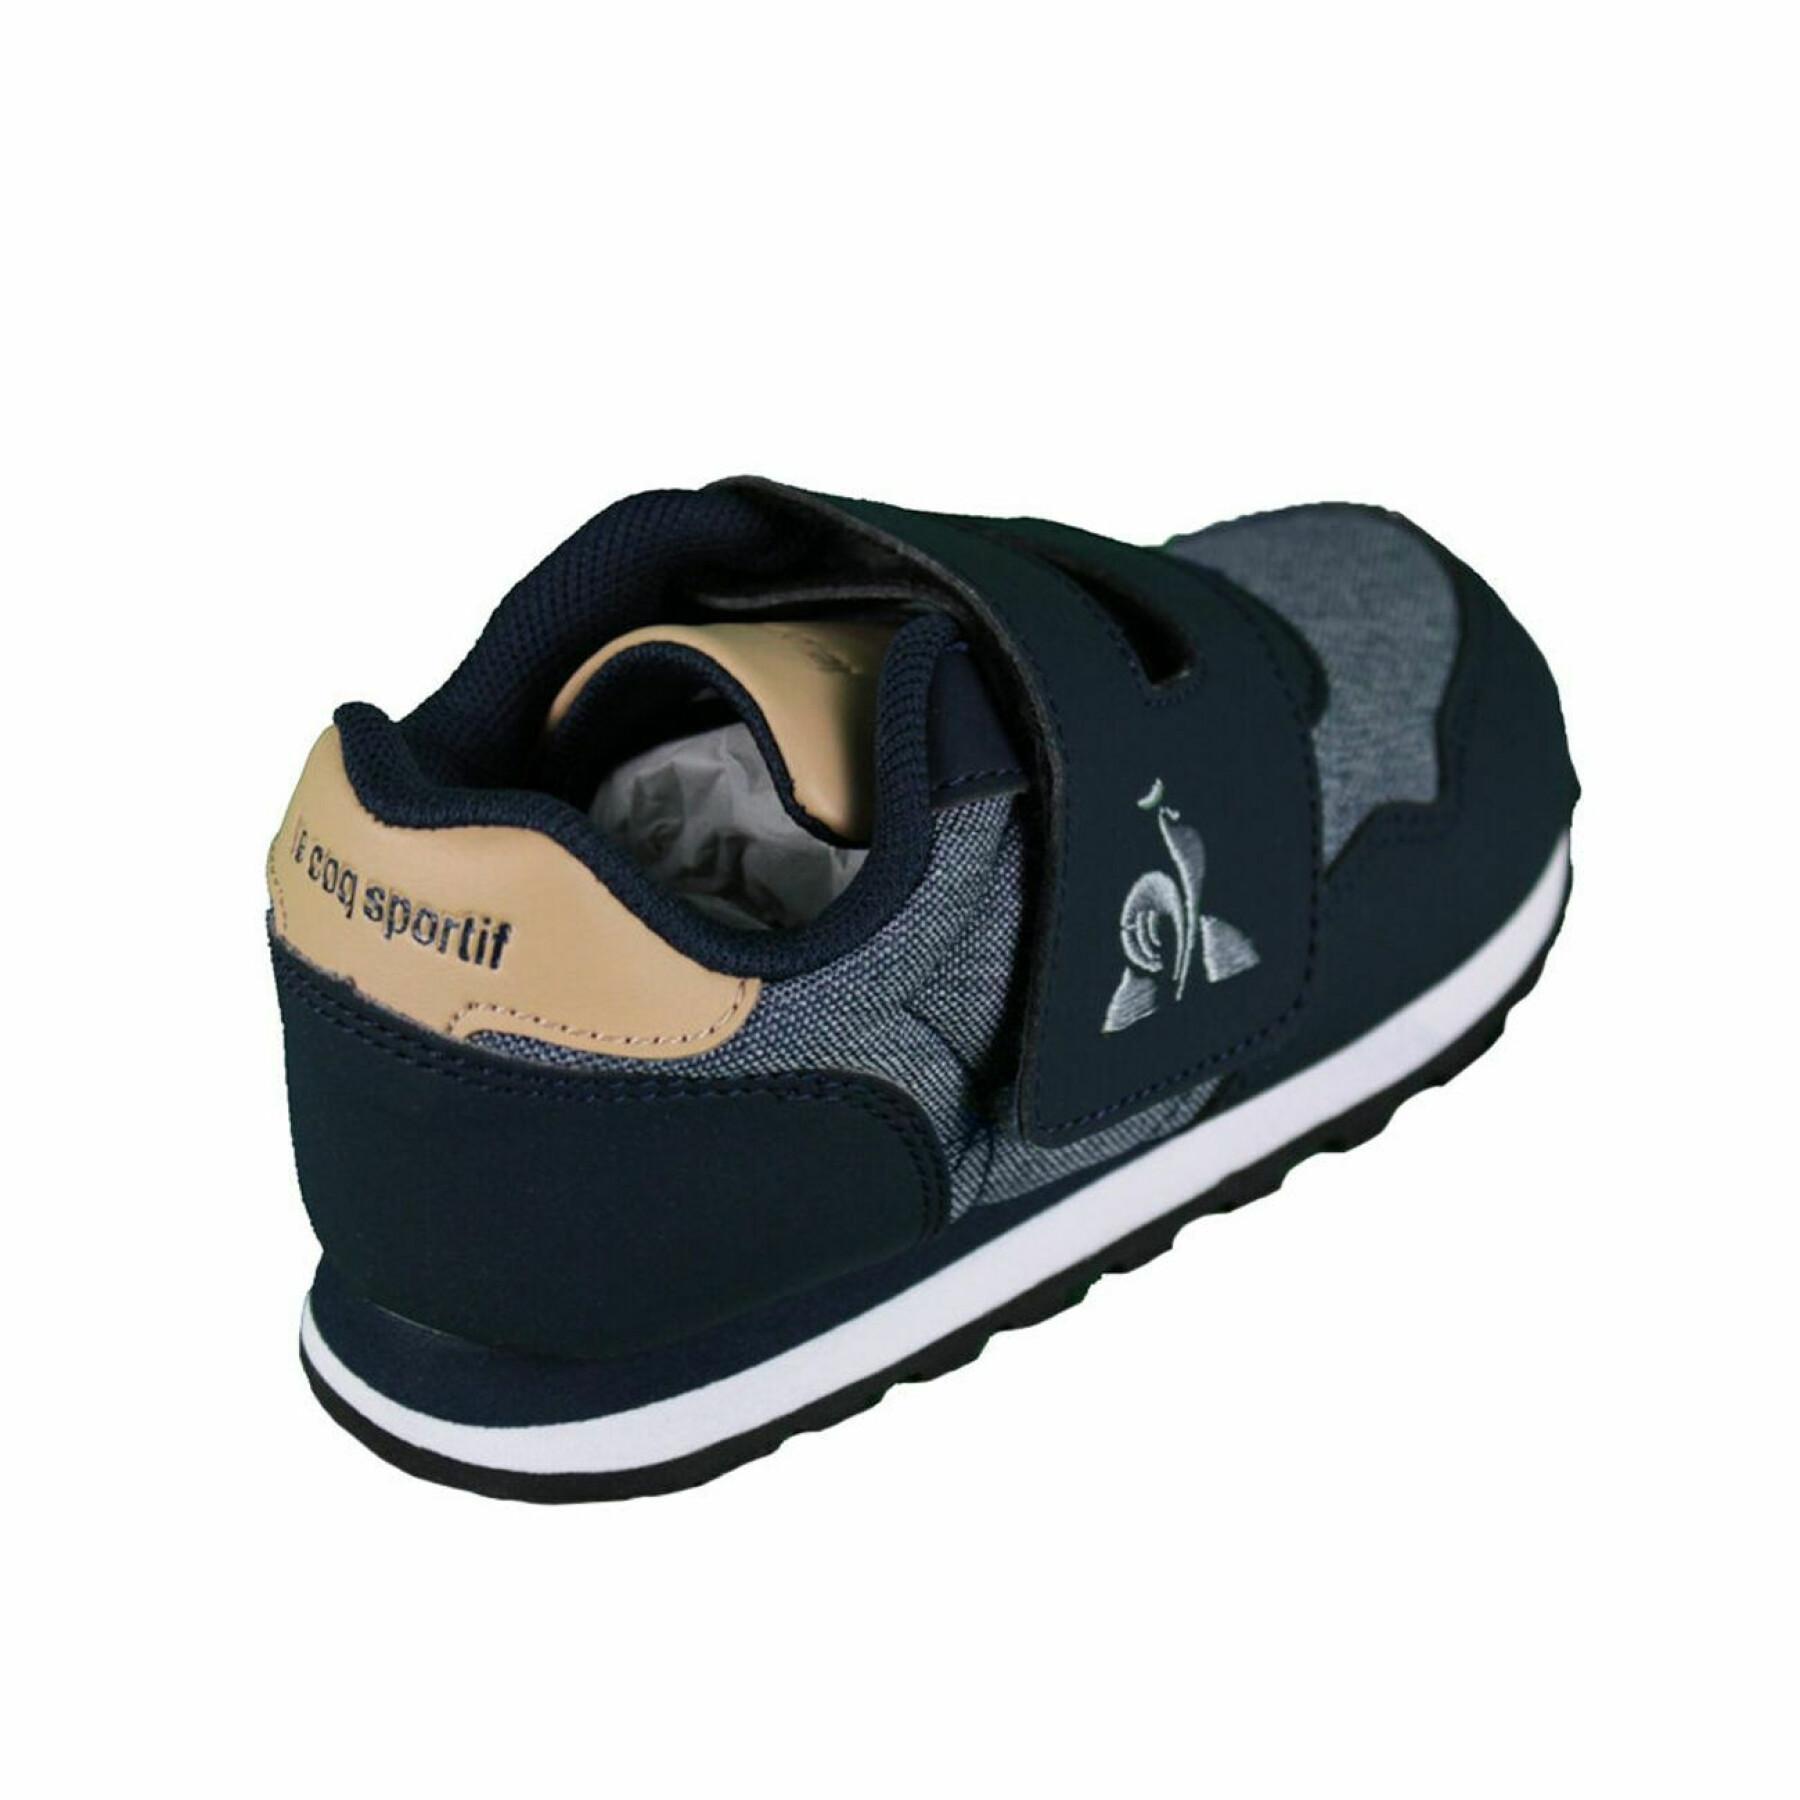 Kindertrainer Le Coq Sportif Astra classic inf